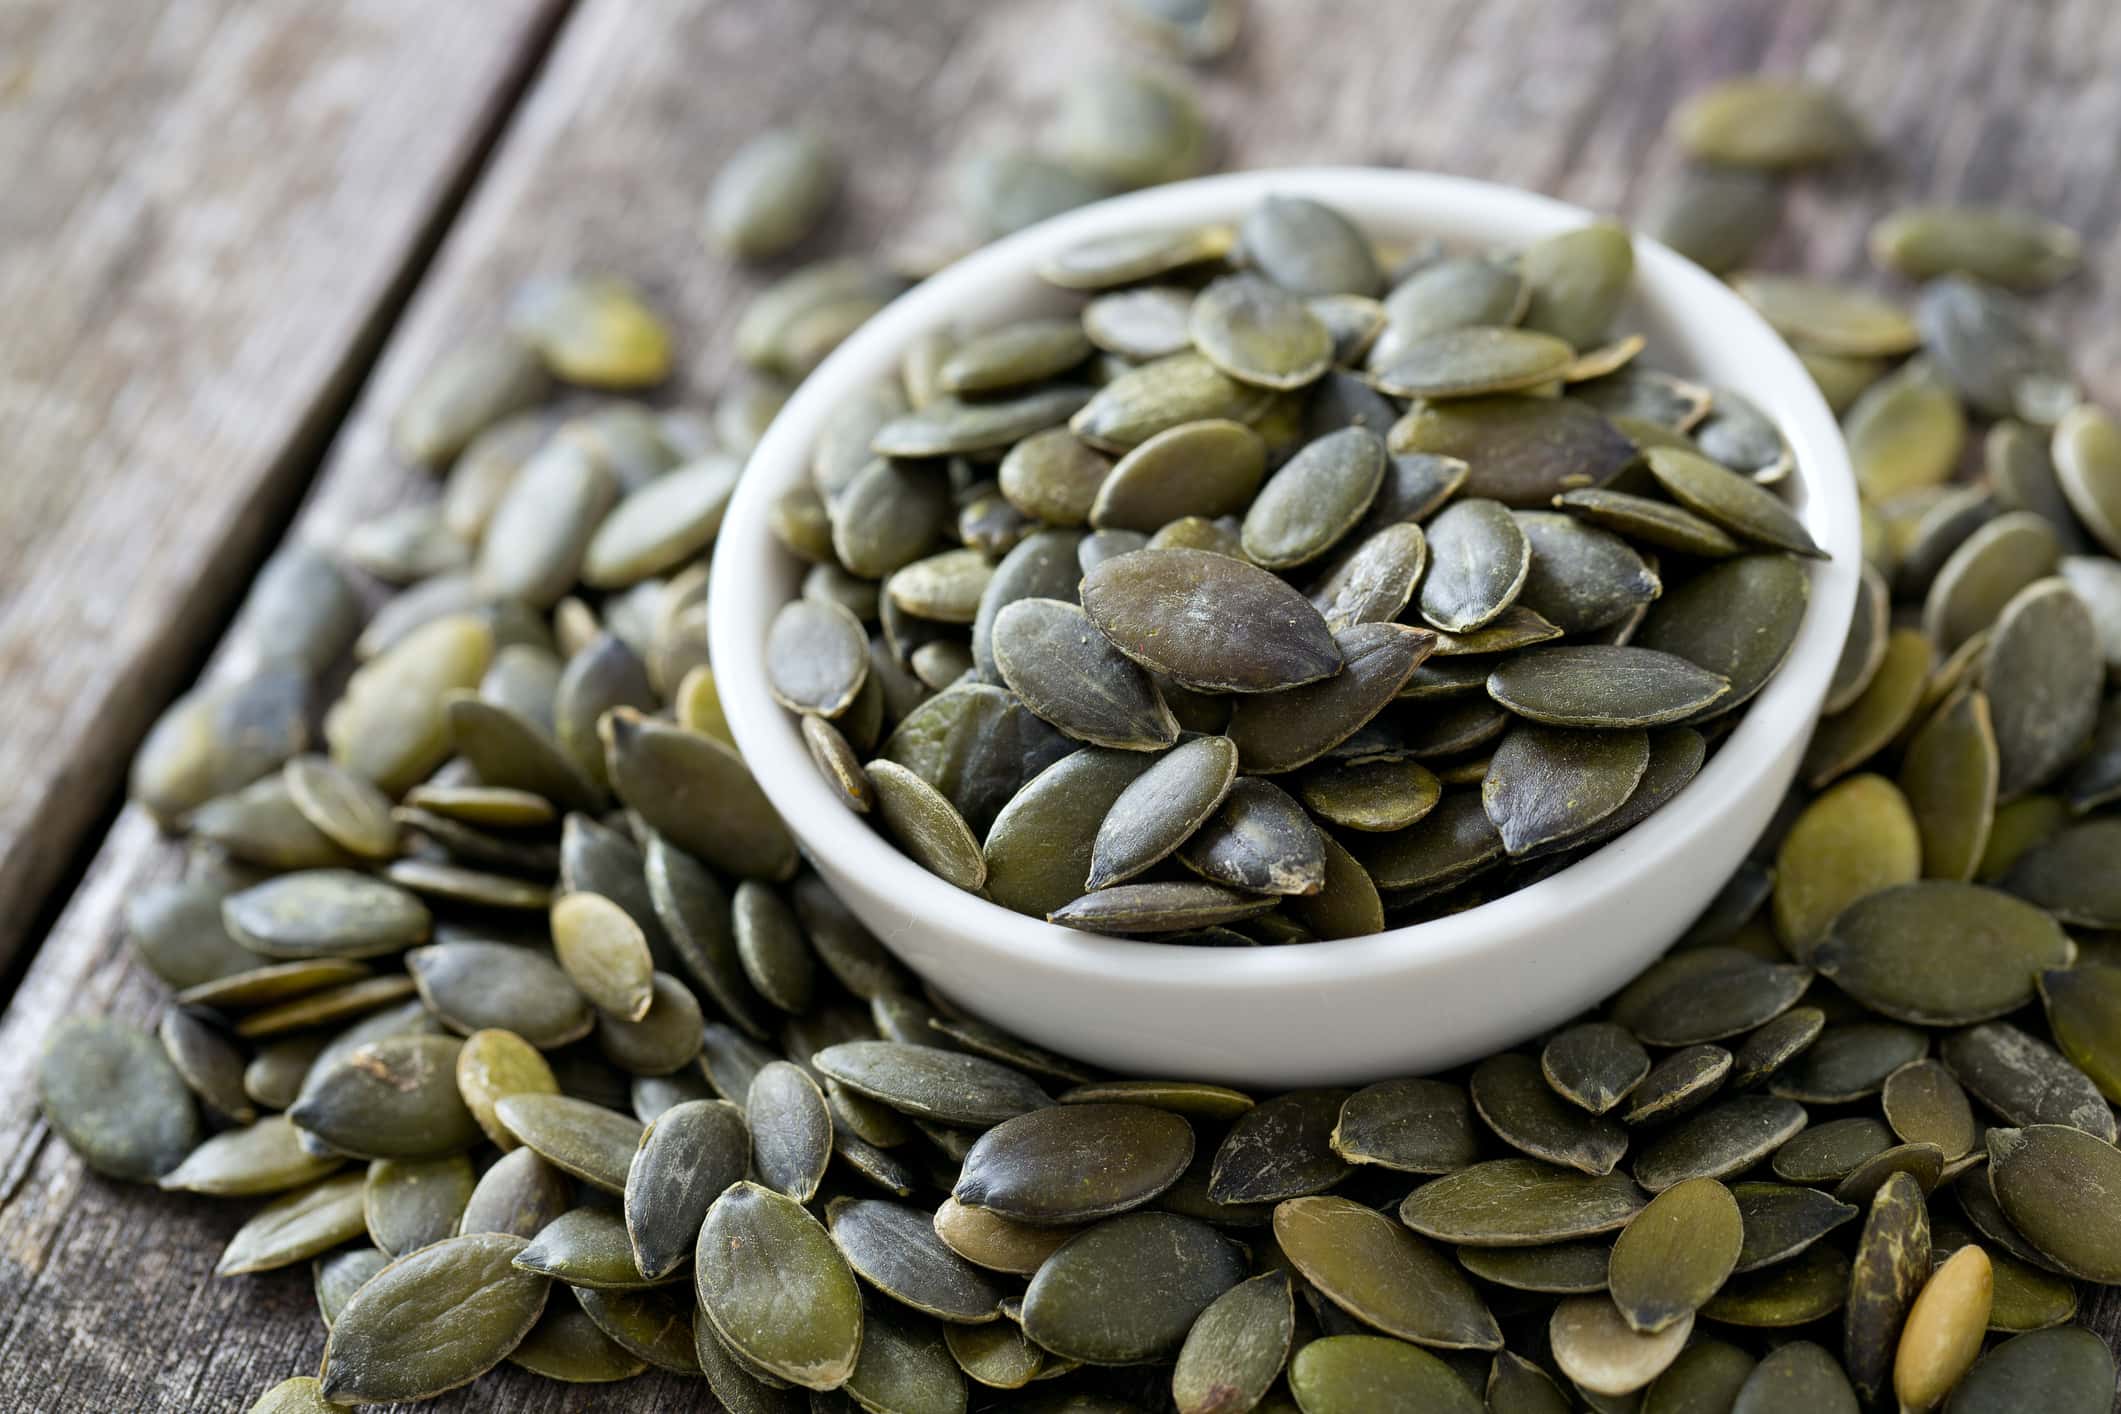 pumpkin seeds in a bowl on wooden surface